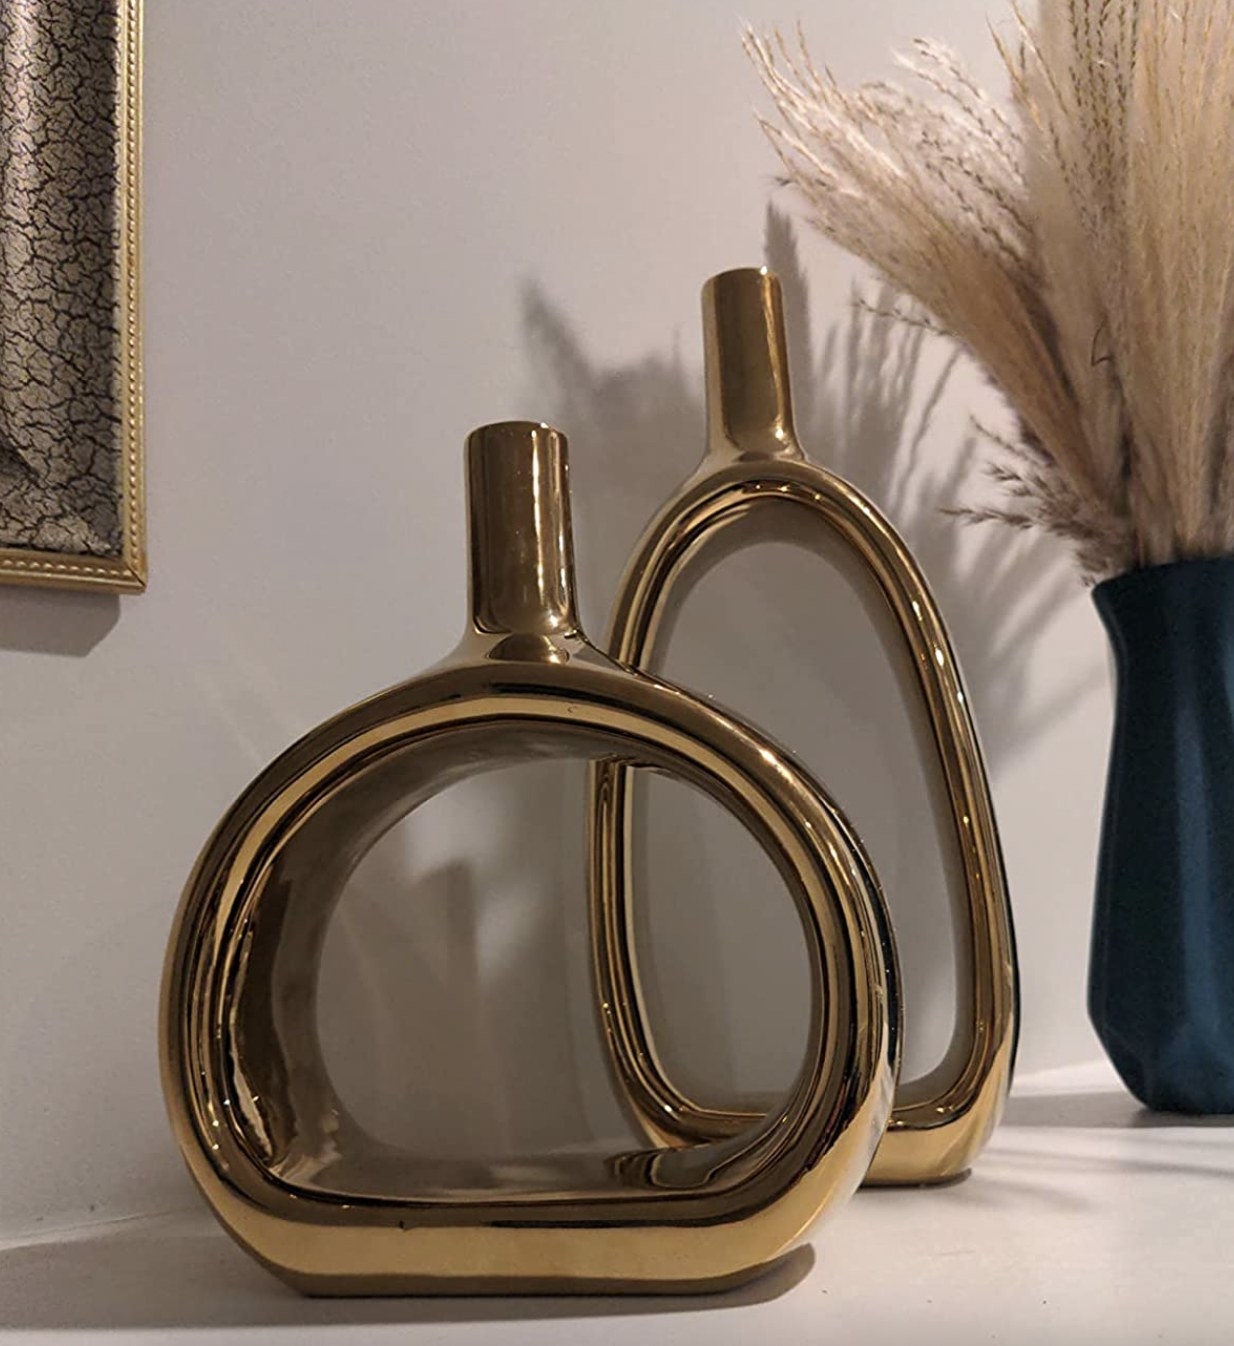 the gold vases